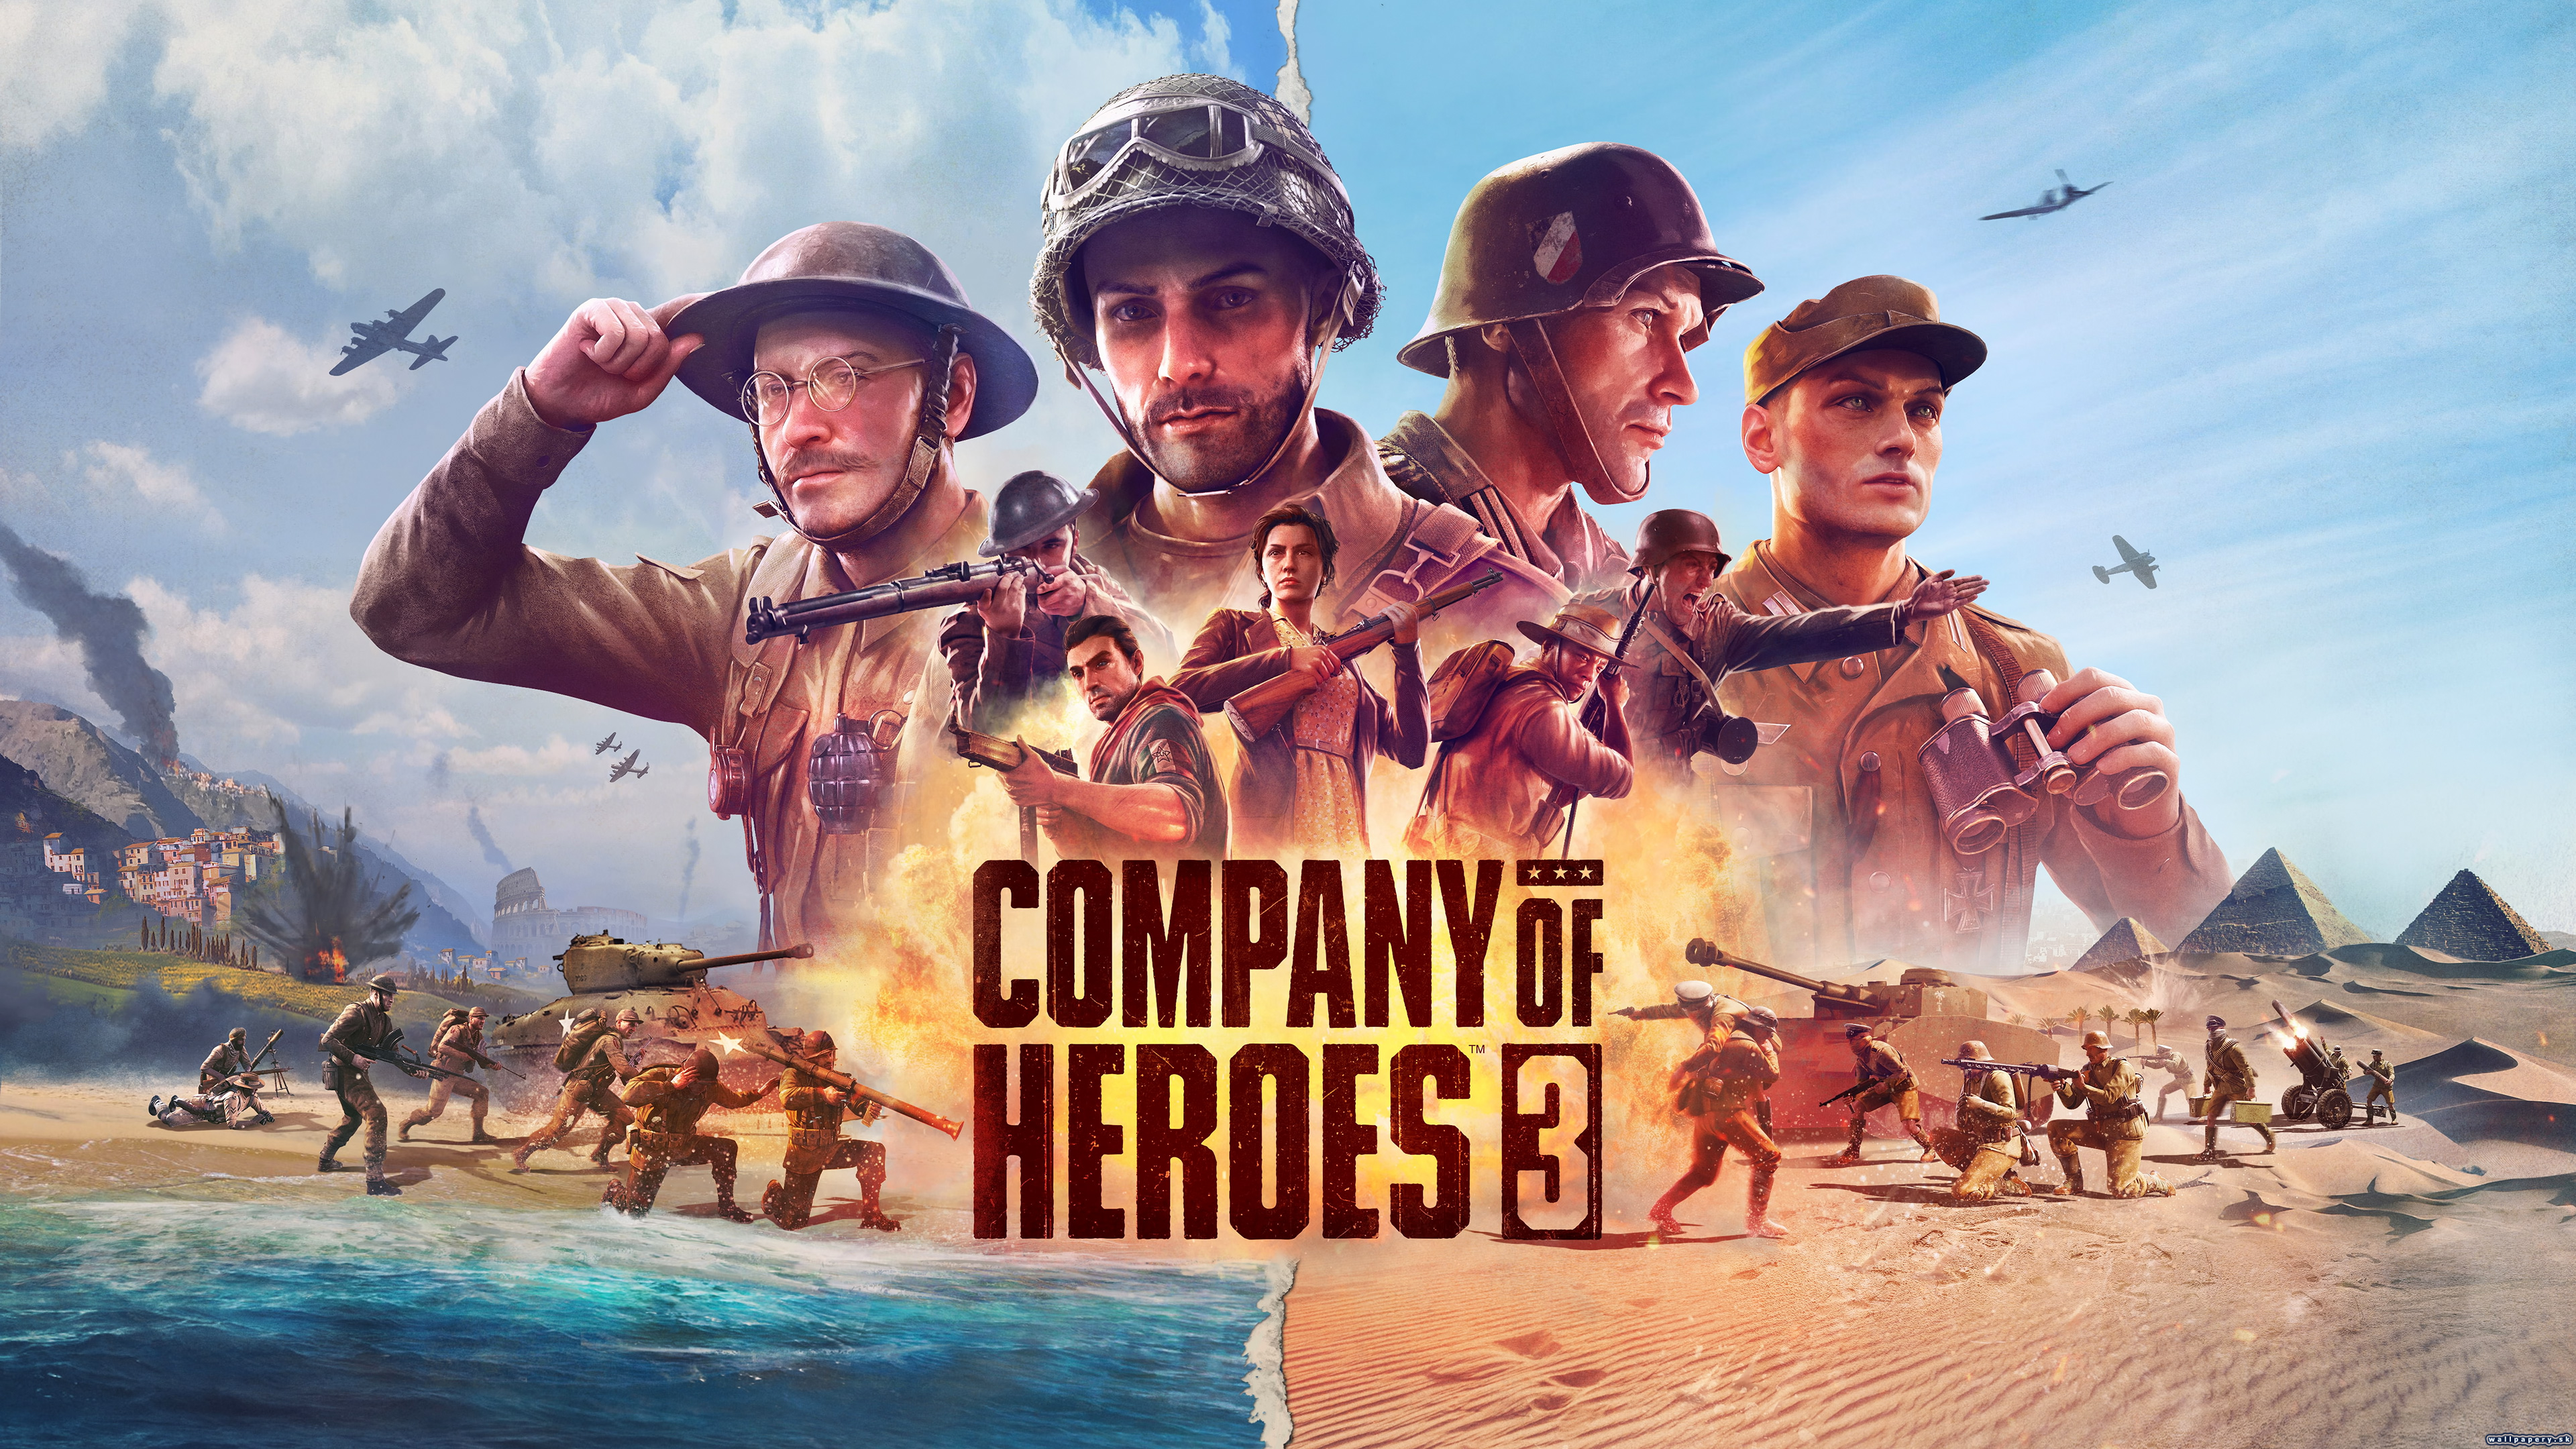 Company of Heroes 3 - wallpaper 1